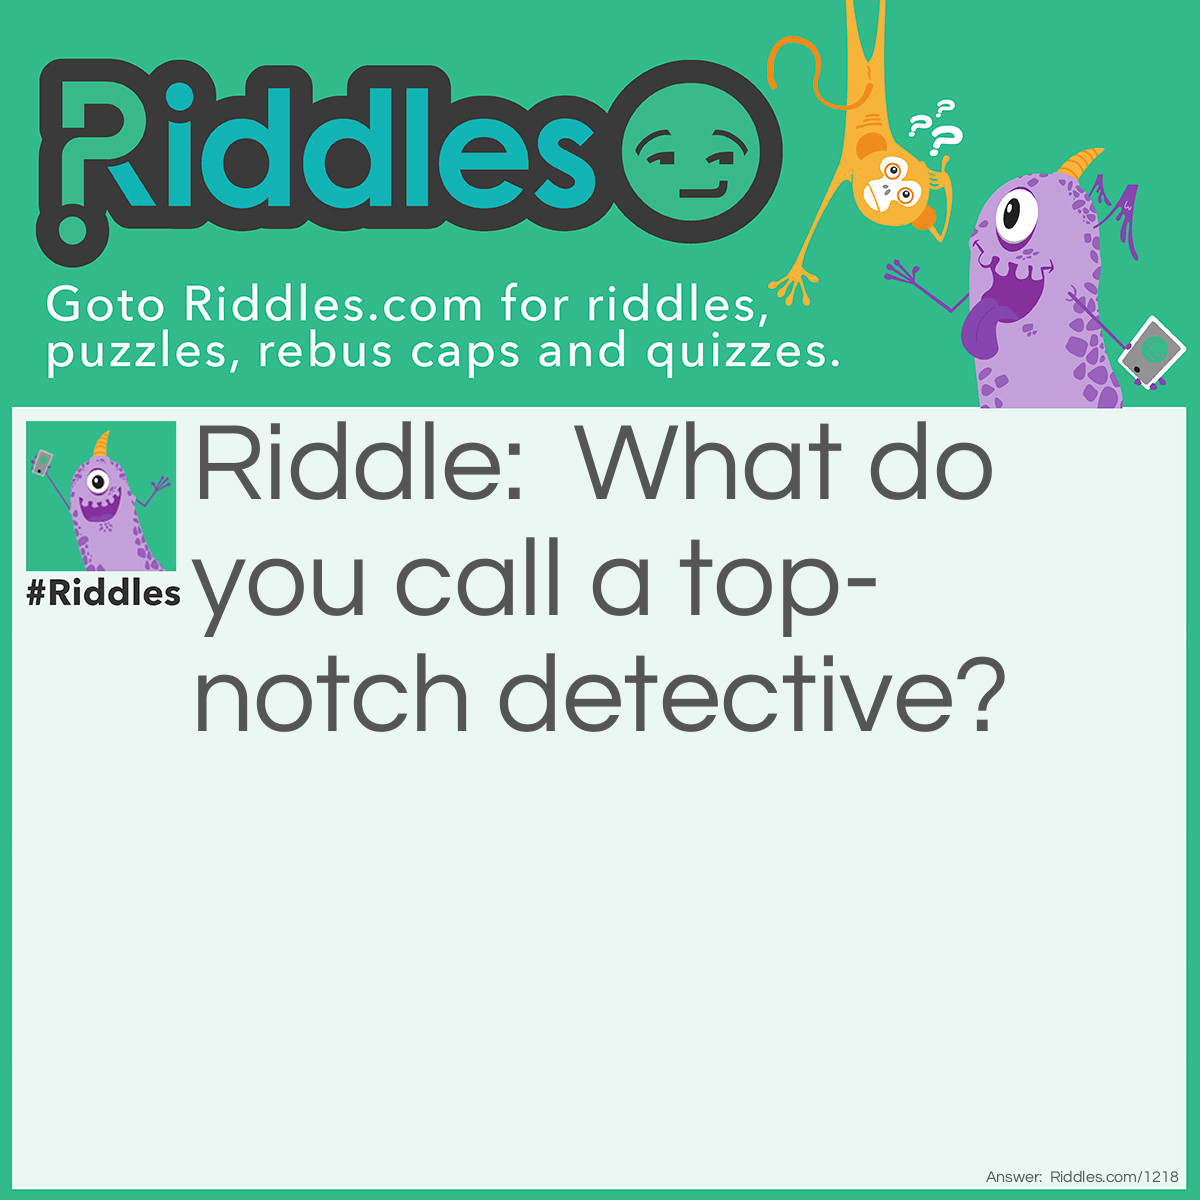 Riddle: What do you call a top-notch detective? Answer: A super snooper.